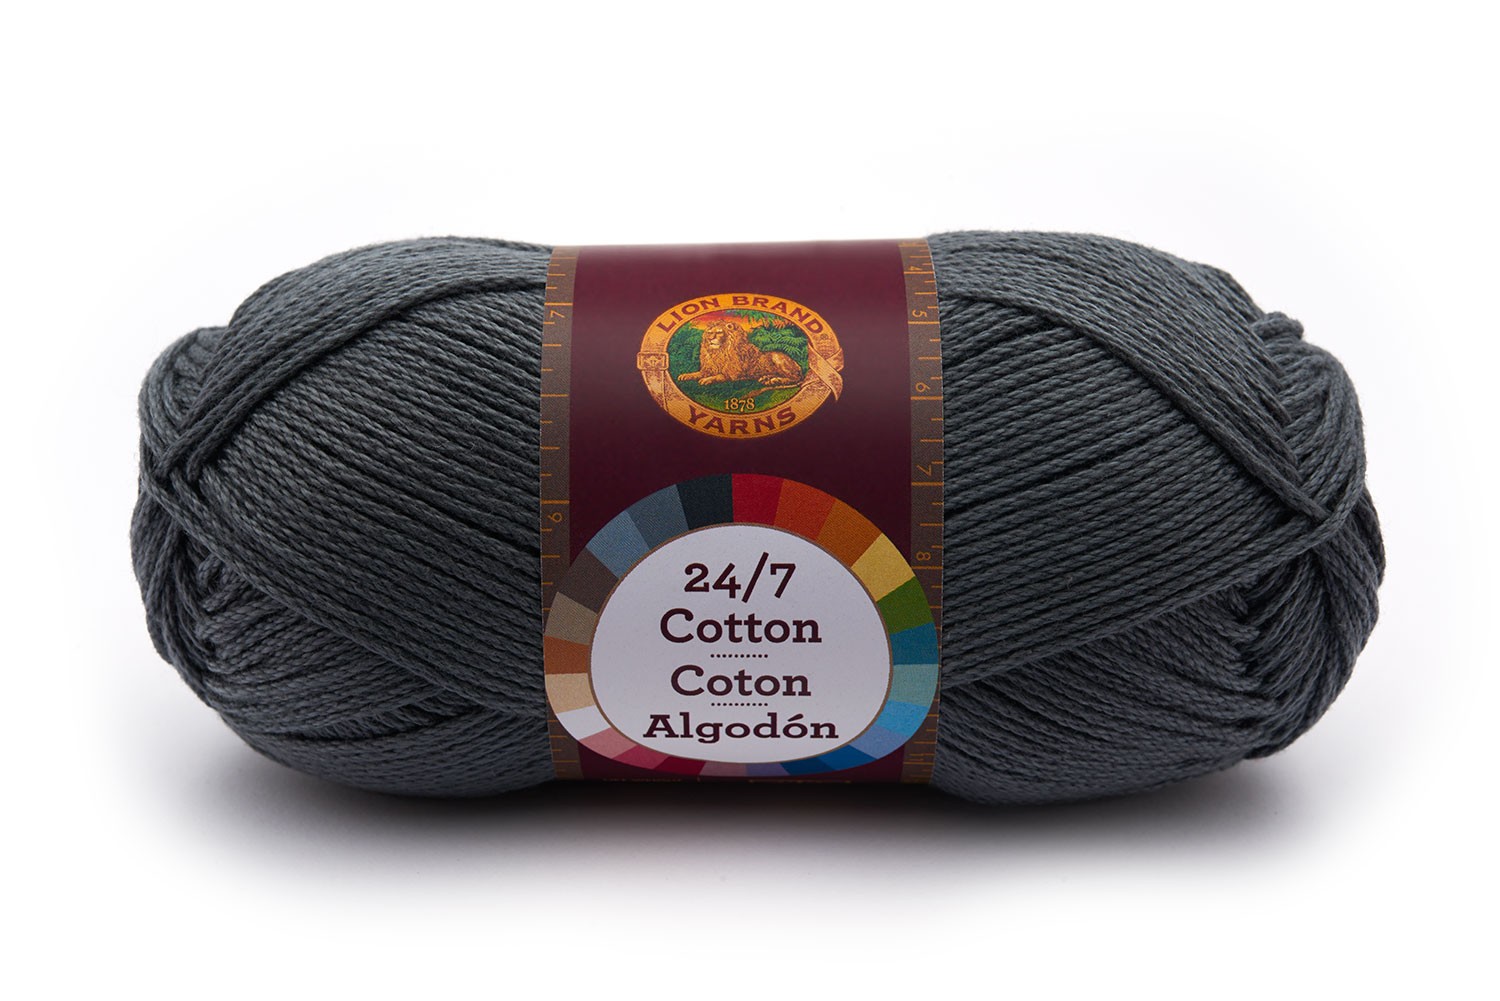 Cotton Algodon in Charcoal